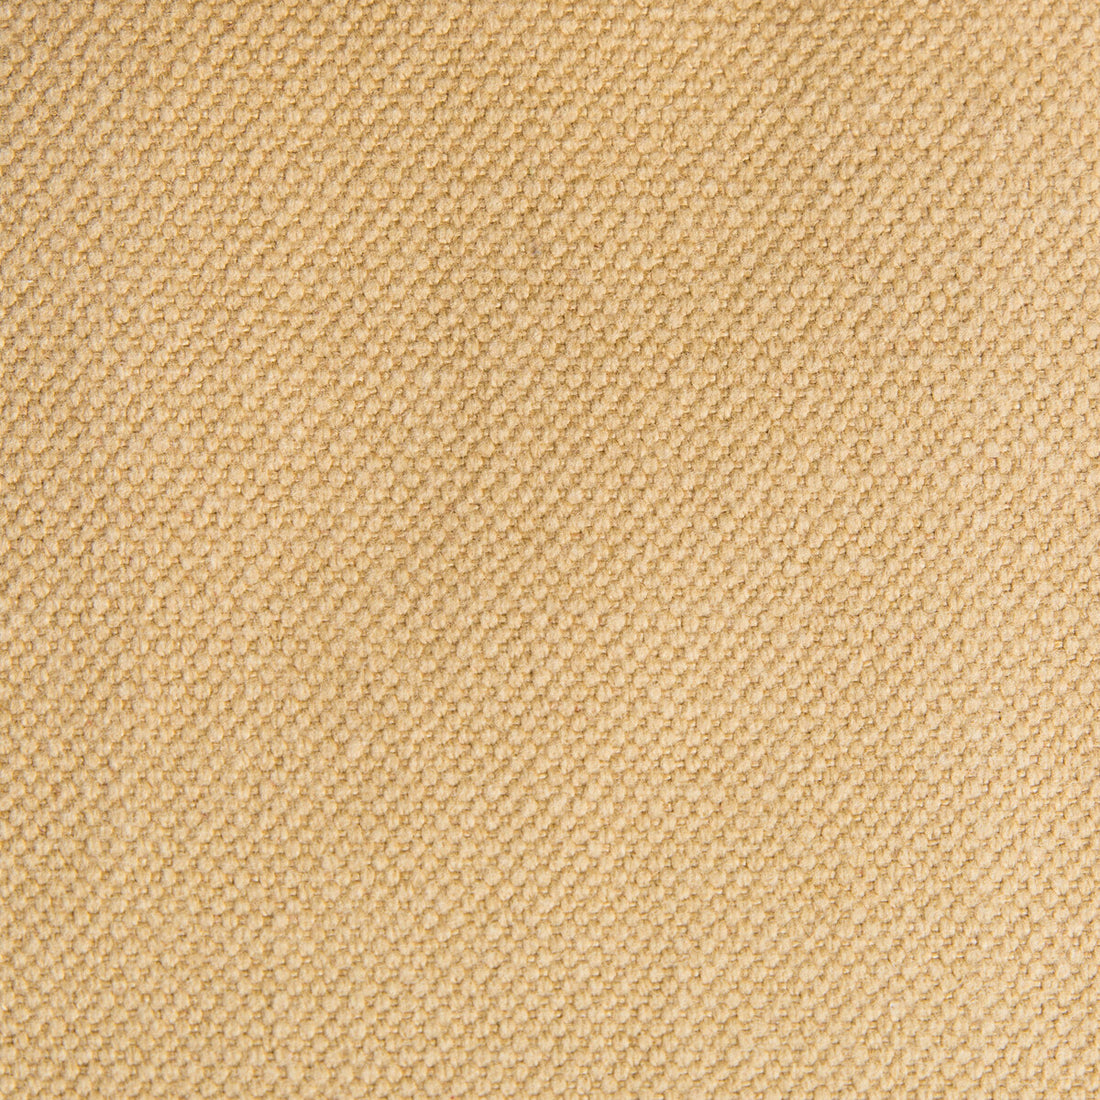 Lima fabric in camel color - pattern GDT5616.004.0 - by Gaston y Daniela in the Gaston Nuevo Mundo collection